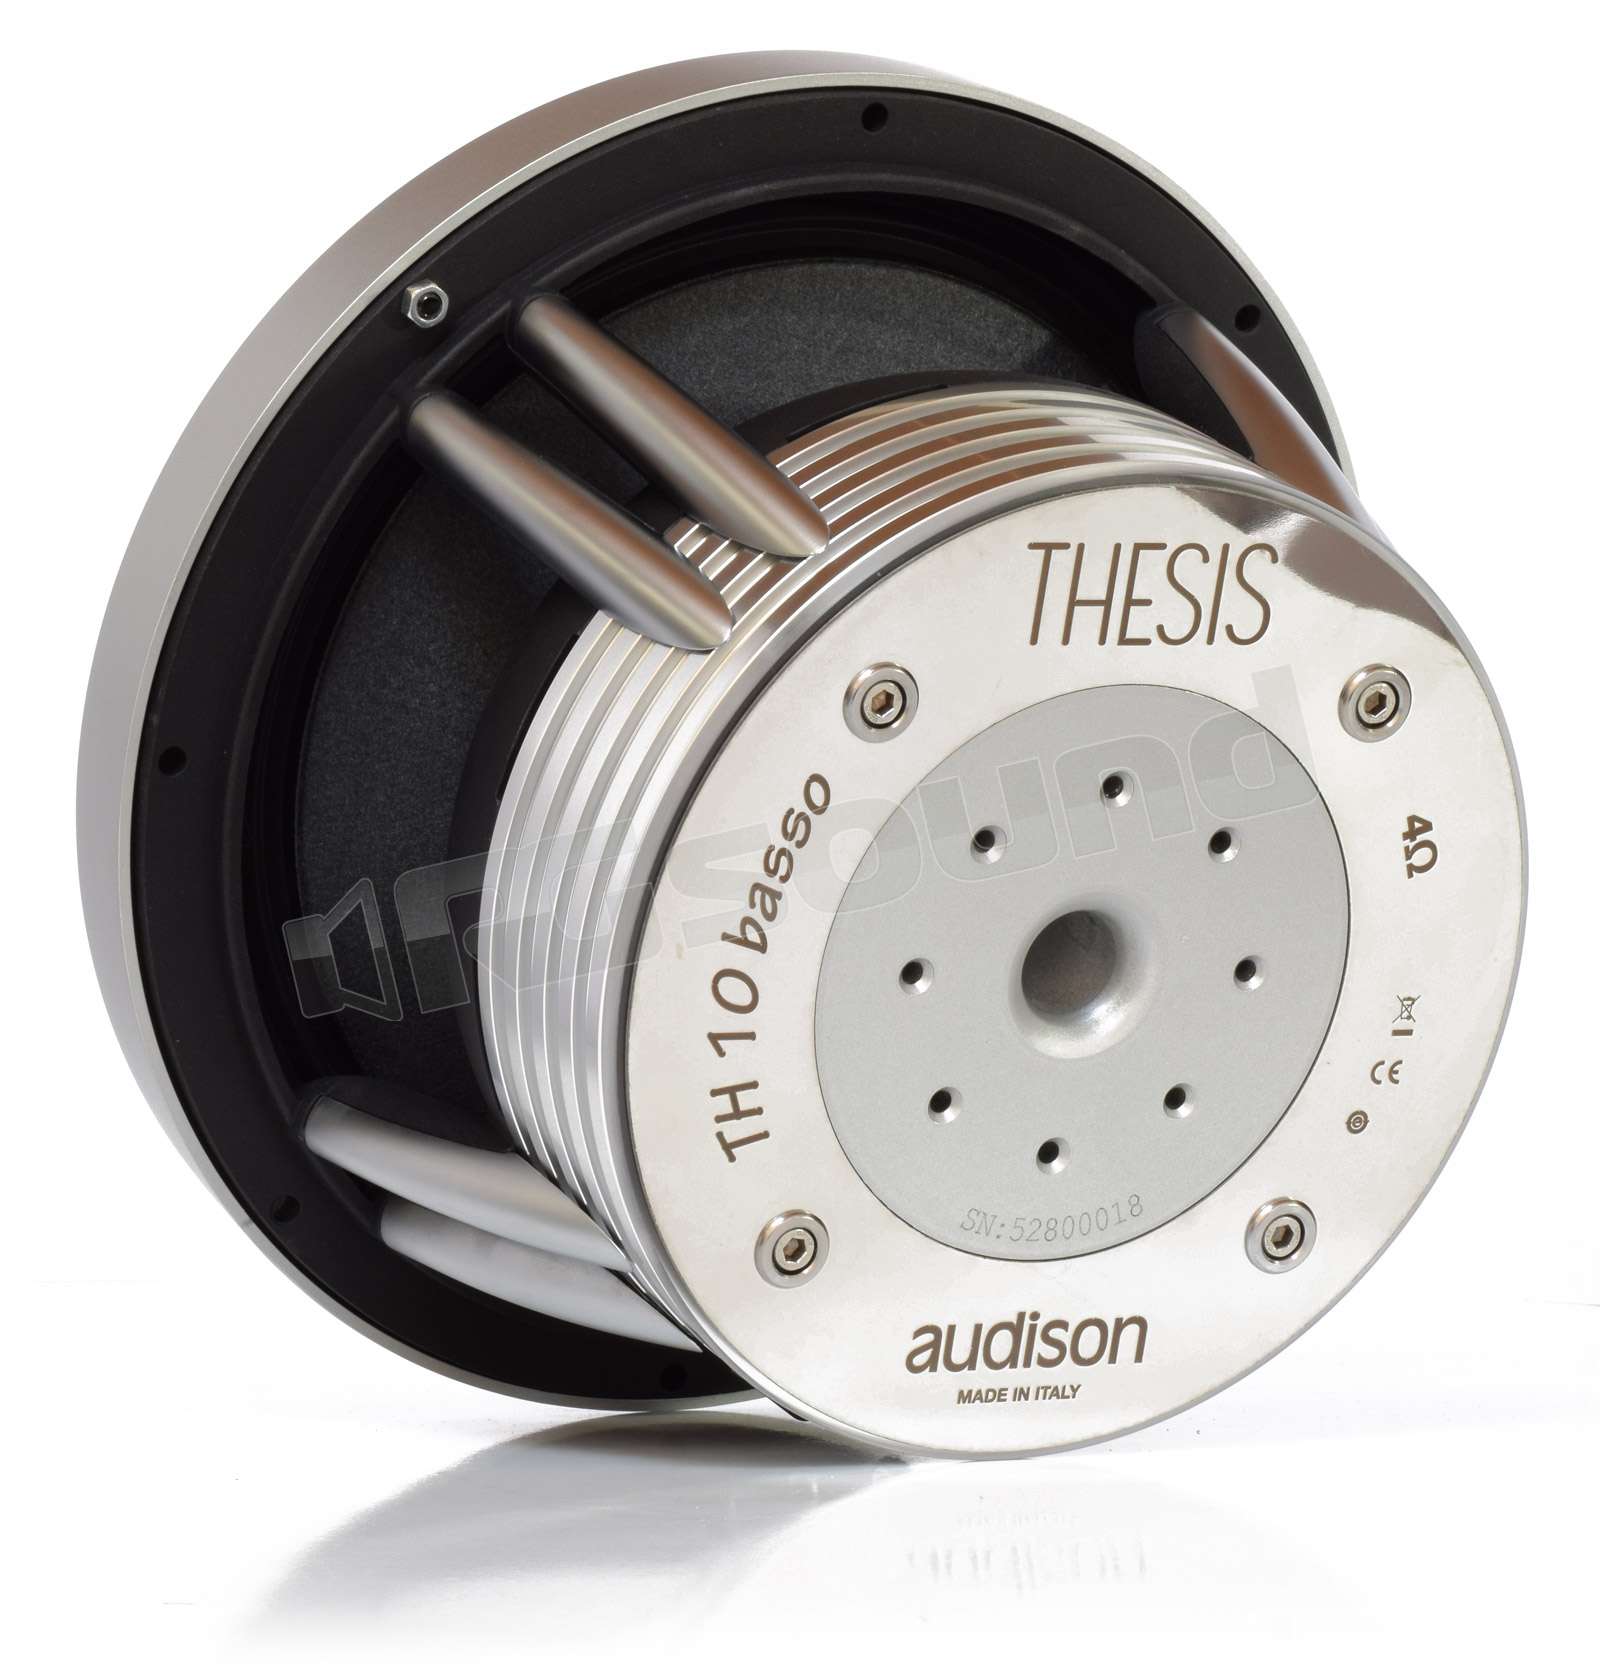 audison thesis th